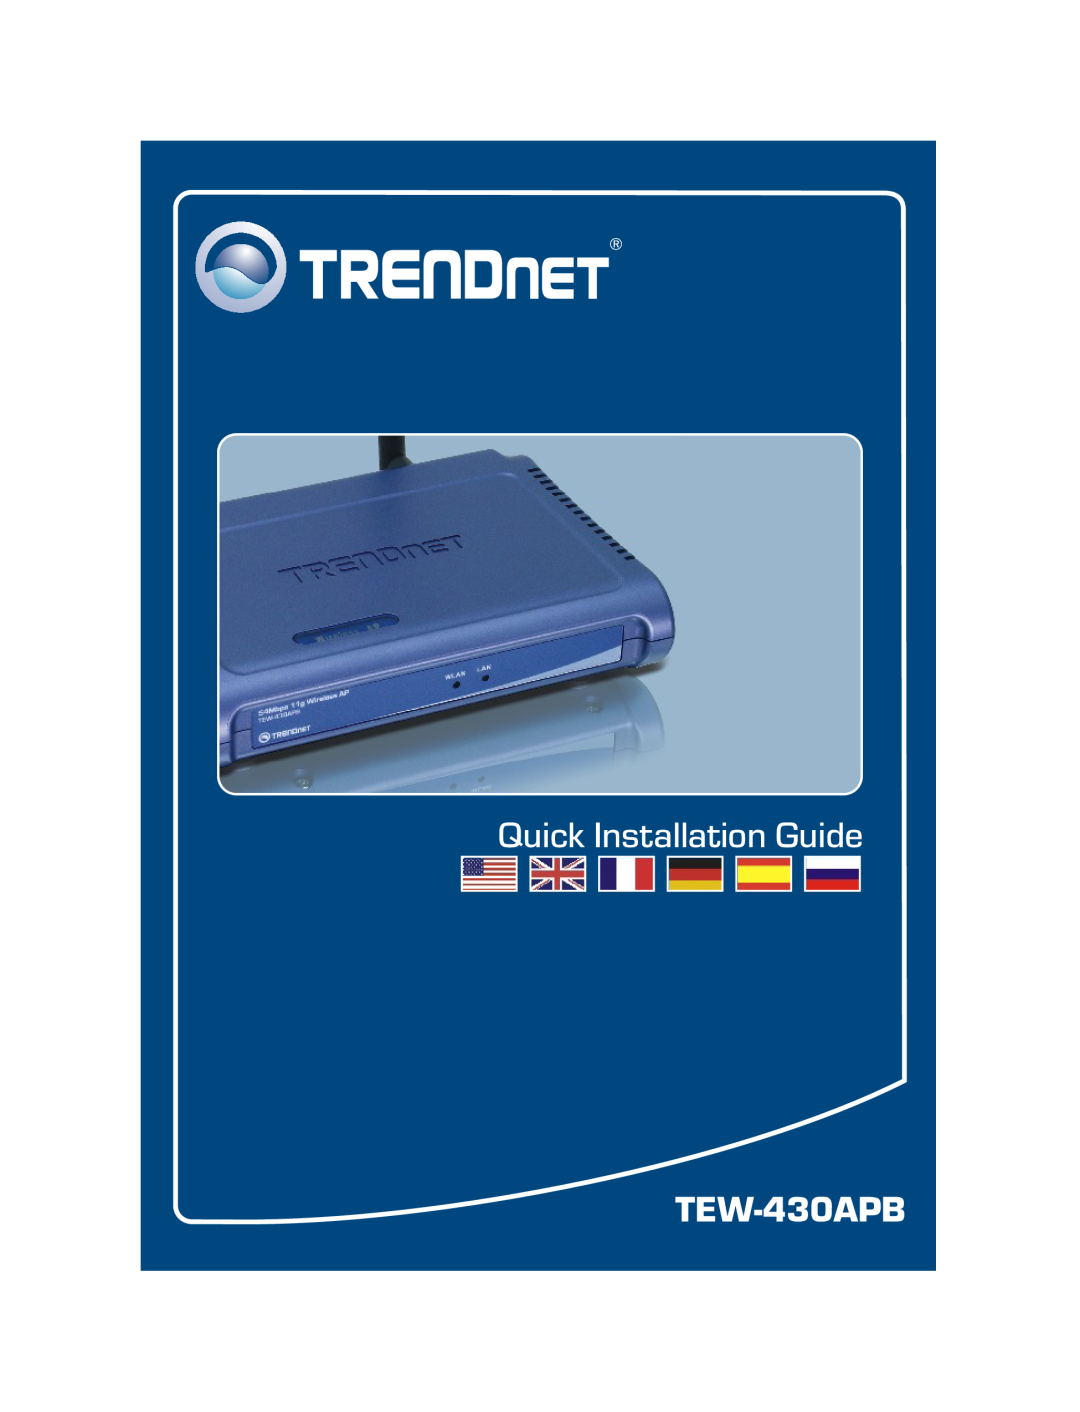 TRENDnet manual TEW-430APB, TRENDnet, Wireless G LAN Access Point Quick Installation Guide, Whats Next in Networking 